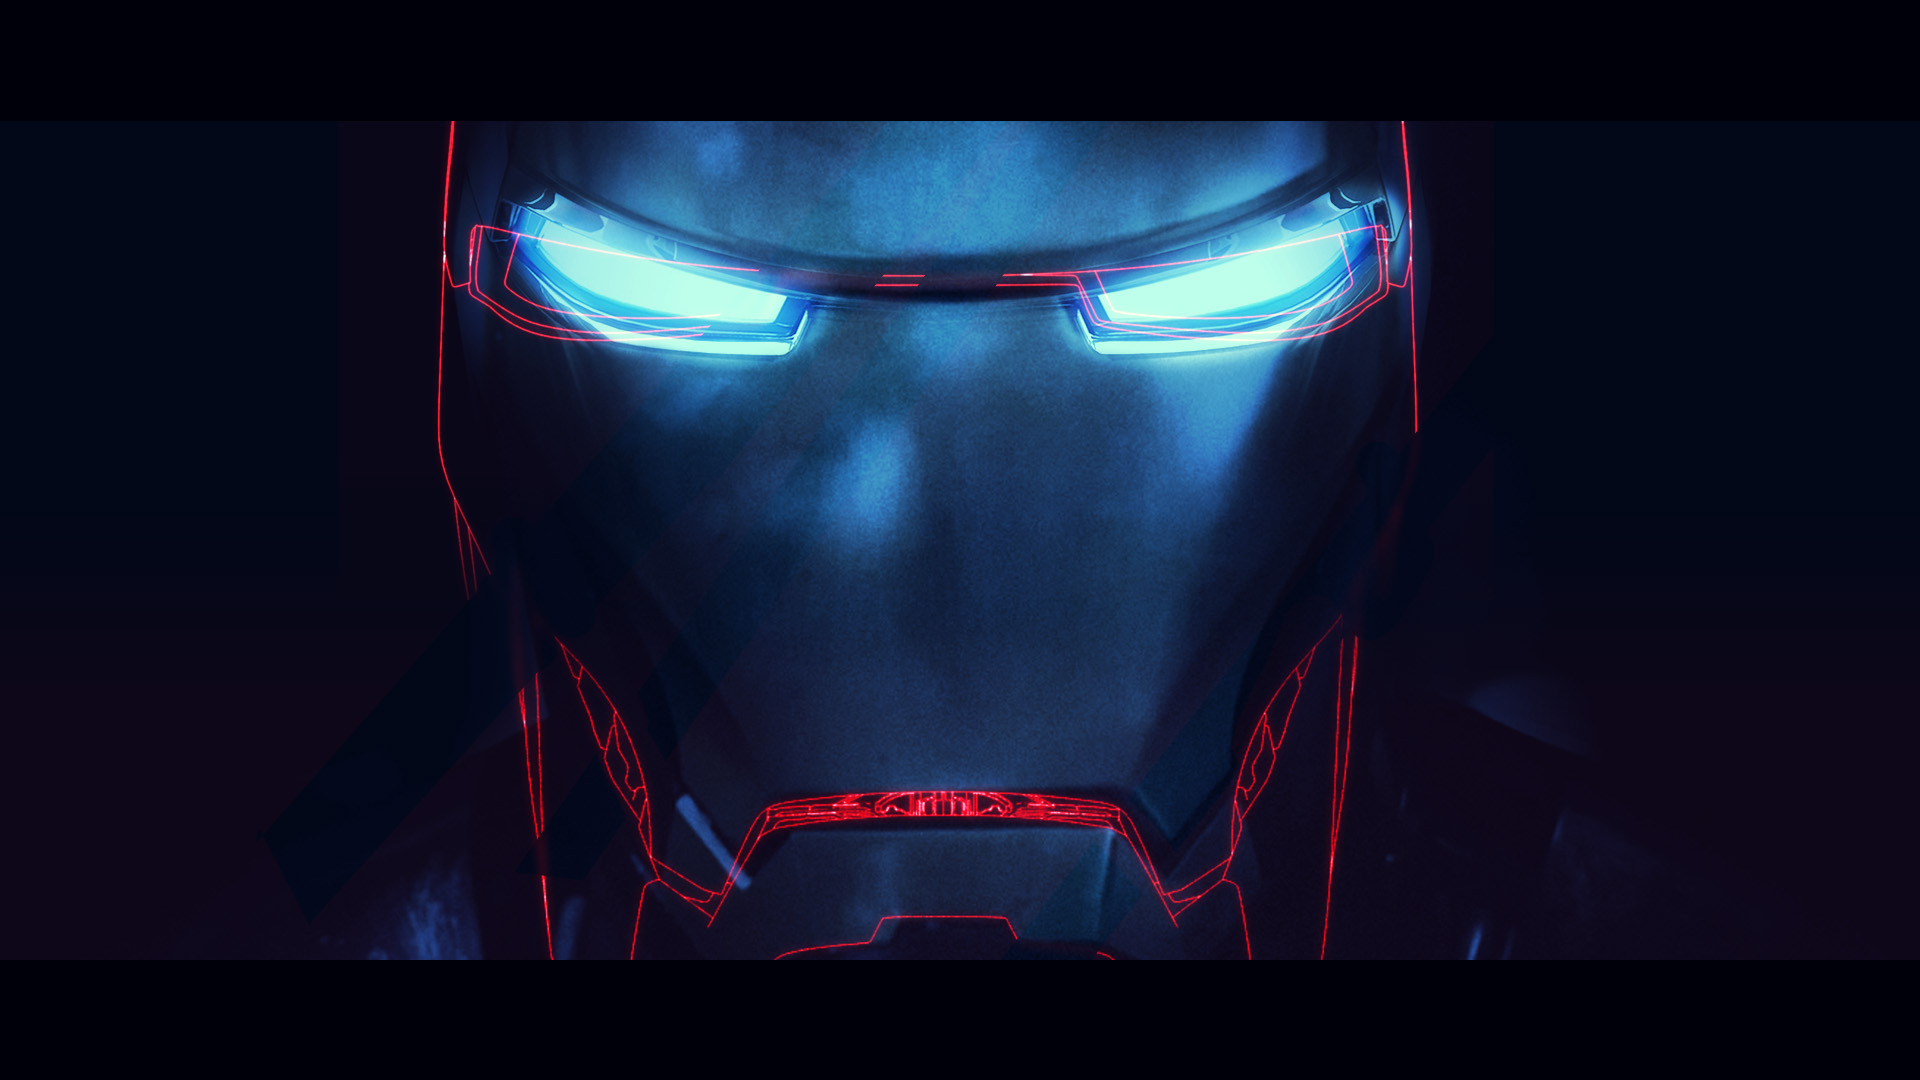 Free Download Iron Man 3 Computer Wallpapers Desktop Backgrounds 1920x1080 Id 1920x1080 For Your Desktop Mobile Tablet Explore 50 800x384 Wallpaper 800x384 Ford Mytouch Wallpaper Ford Sync Wallpaper Myford Touch Wallpaper